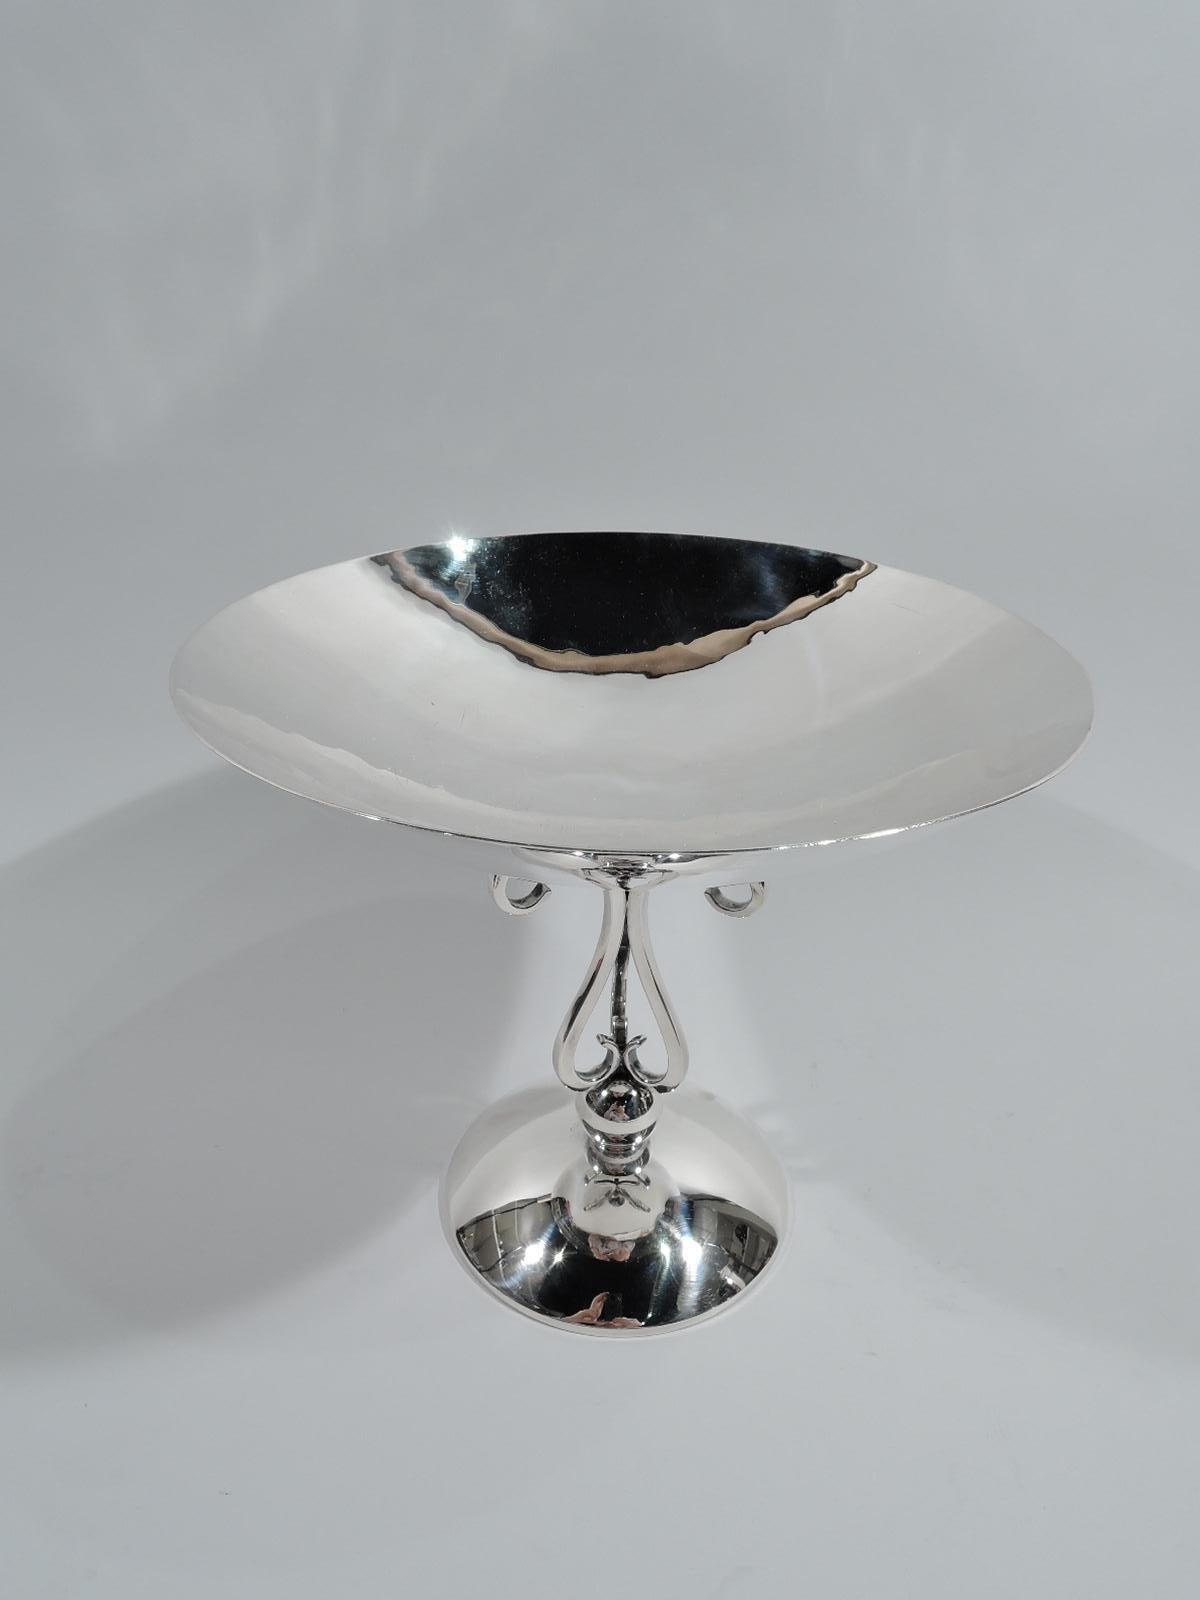 Mid-Century Modern sterling silver compote. Made by Alfredo Sciarrotta in Newport. Round curved bowl on open support comprising 3 s-scroll supports mounted to ball on raised round foot. Fully marked including maker’s and retailer’s (Cartier) stamps,